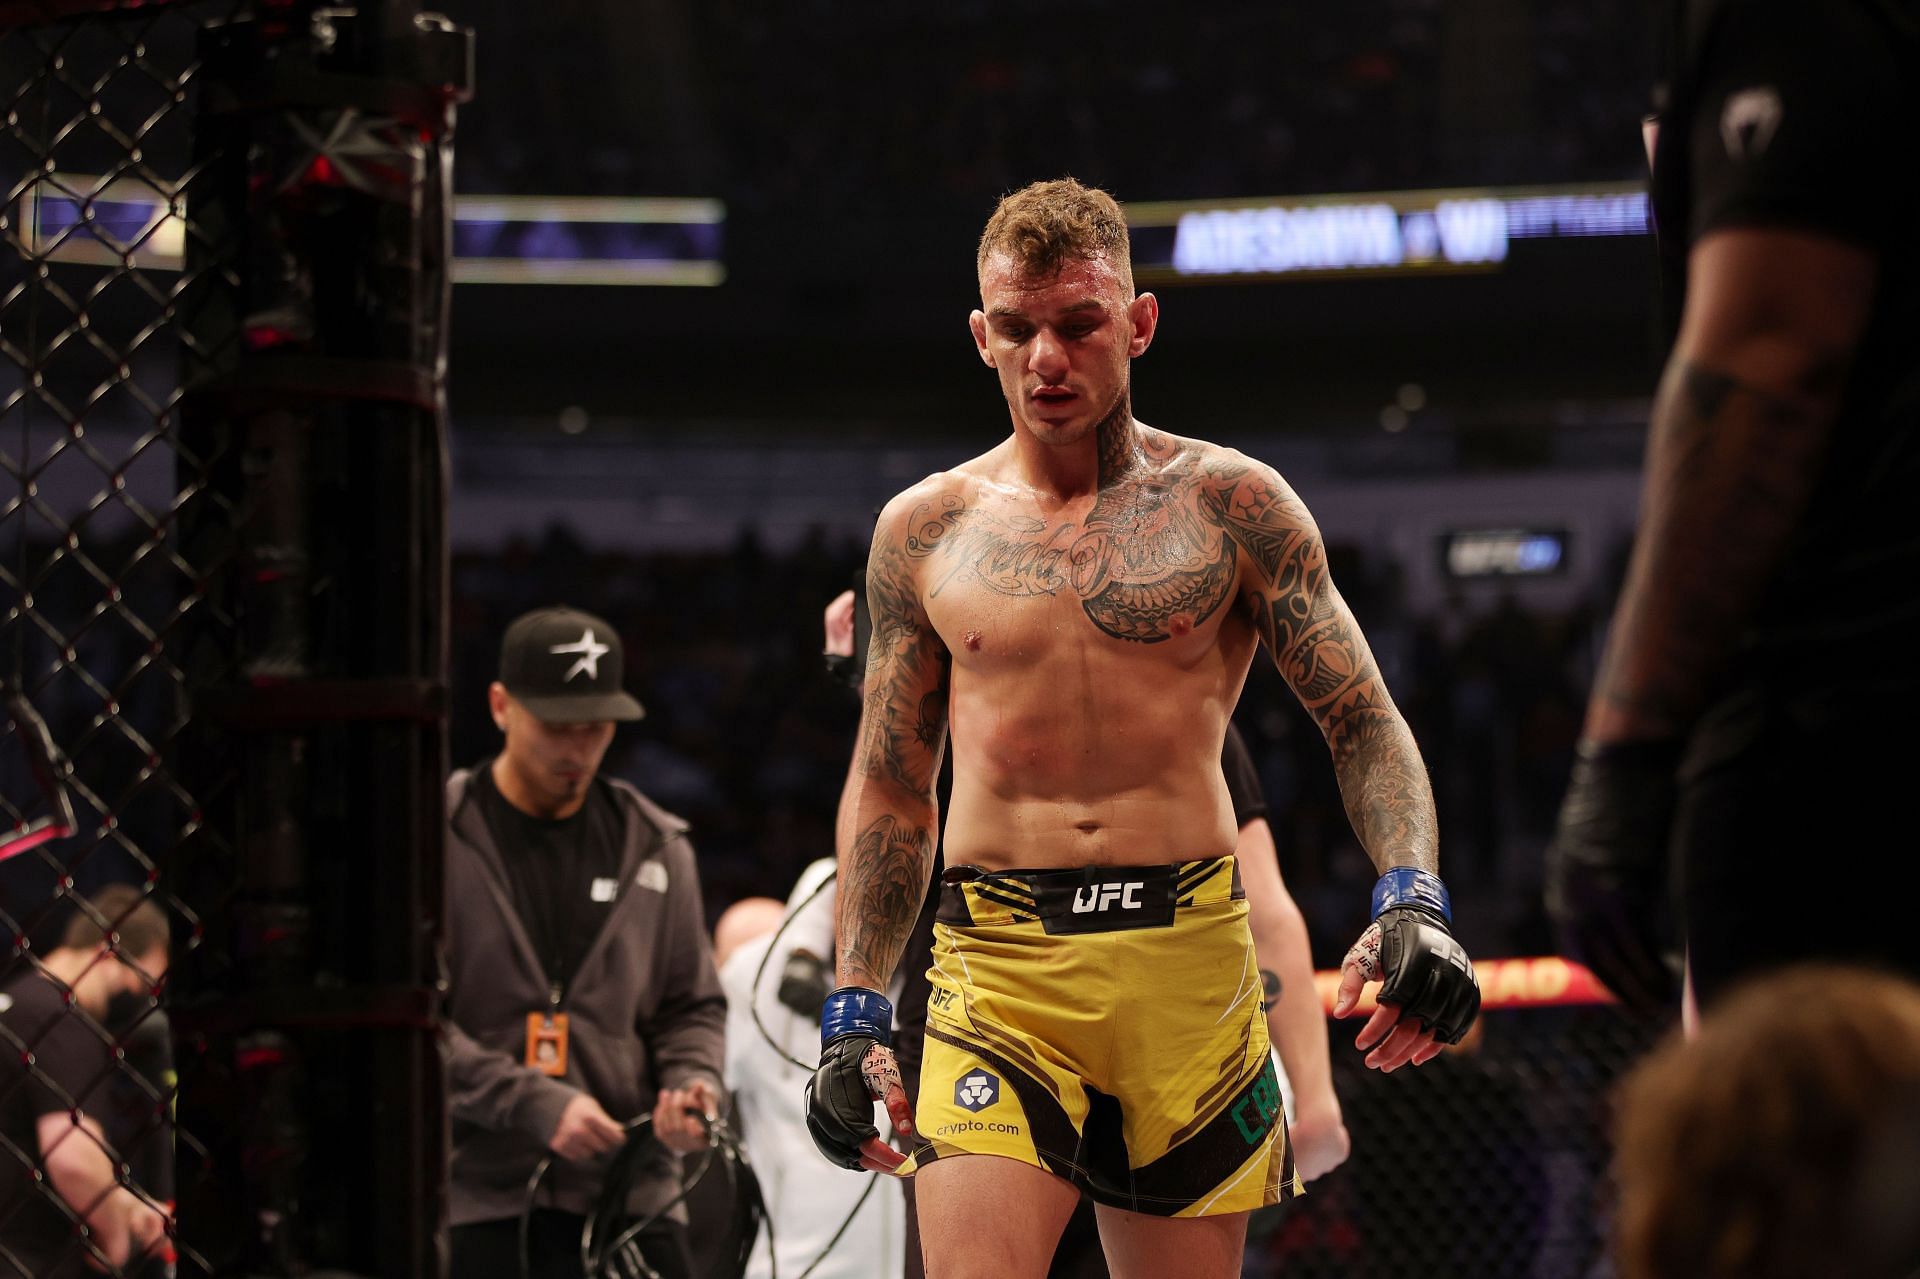 Renato Moicano will be hoping to make the most of a late notice opportunity when he takes on Rafael dos Anjos this weekend